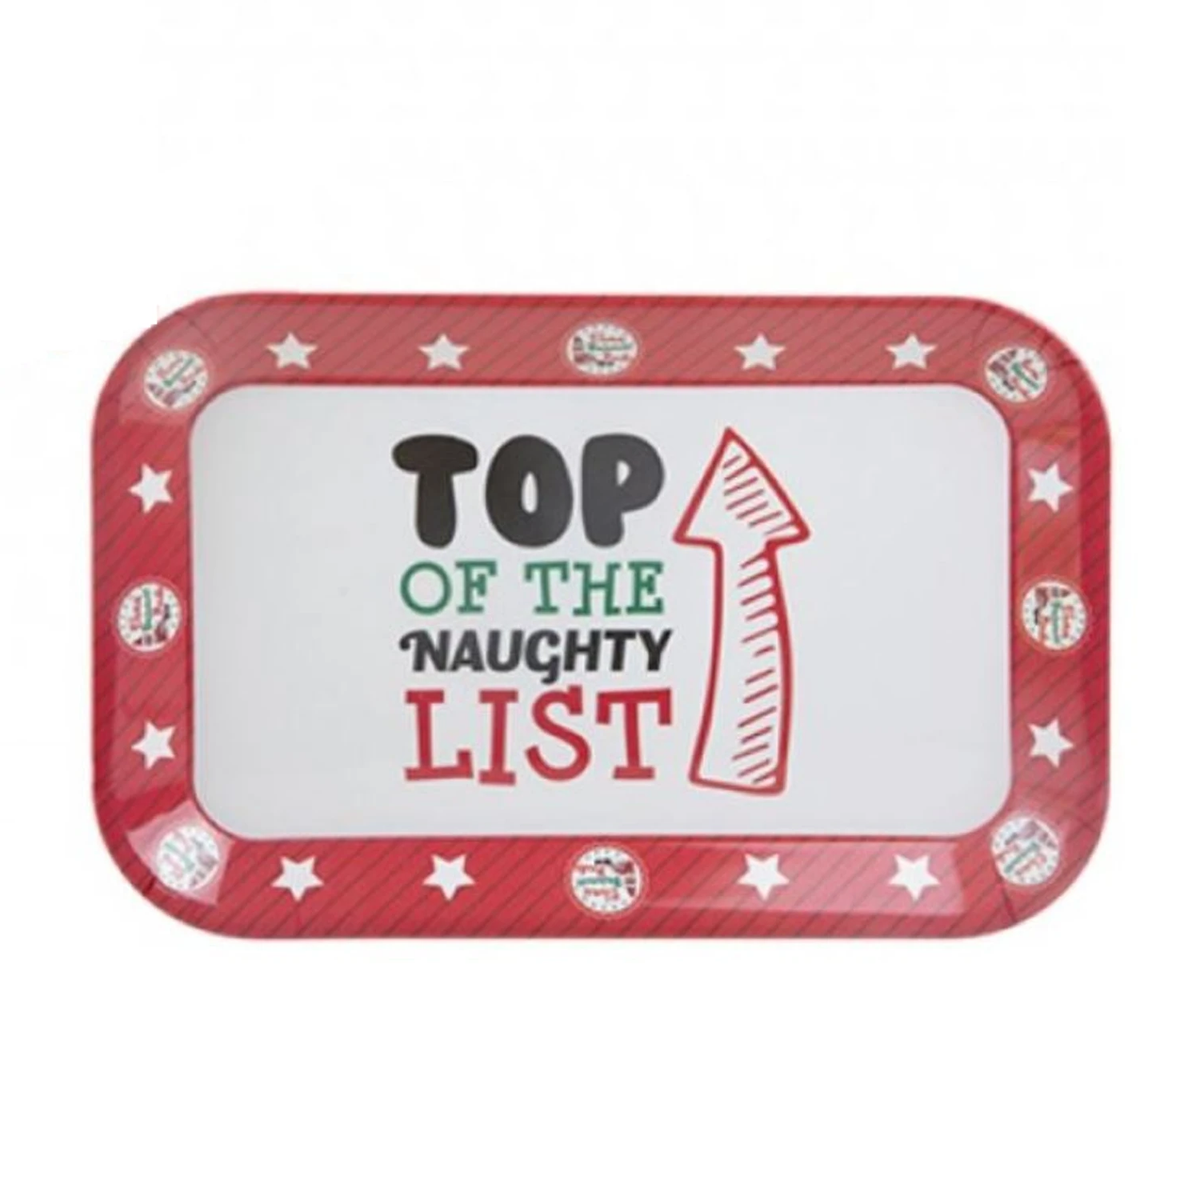 Elf Melamine Tray - Top of the Naughty List! Party Tray